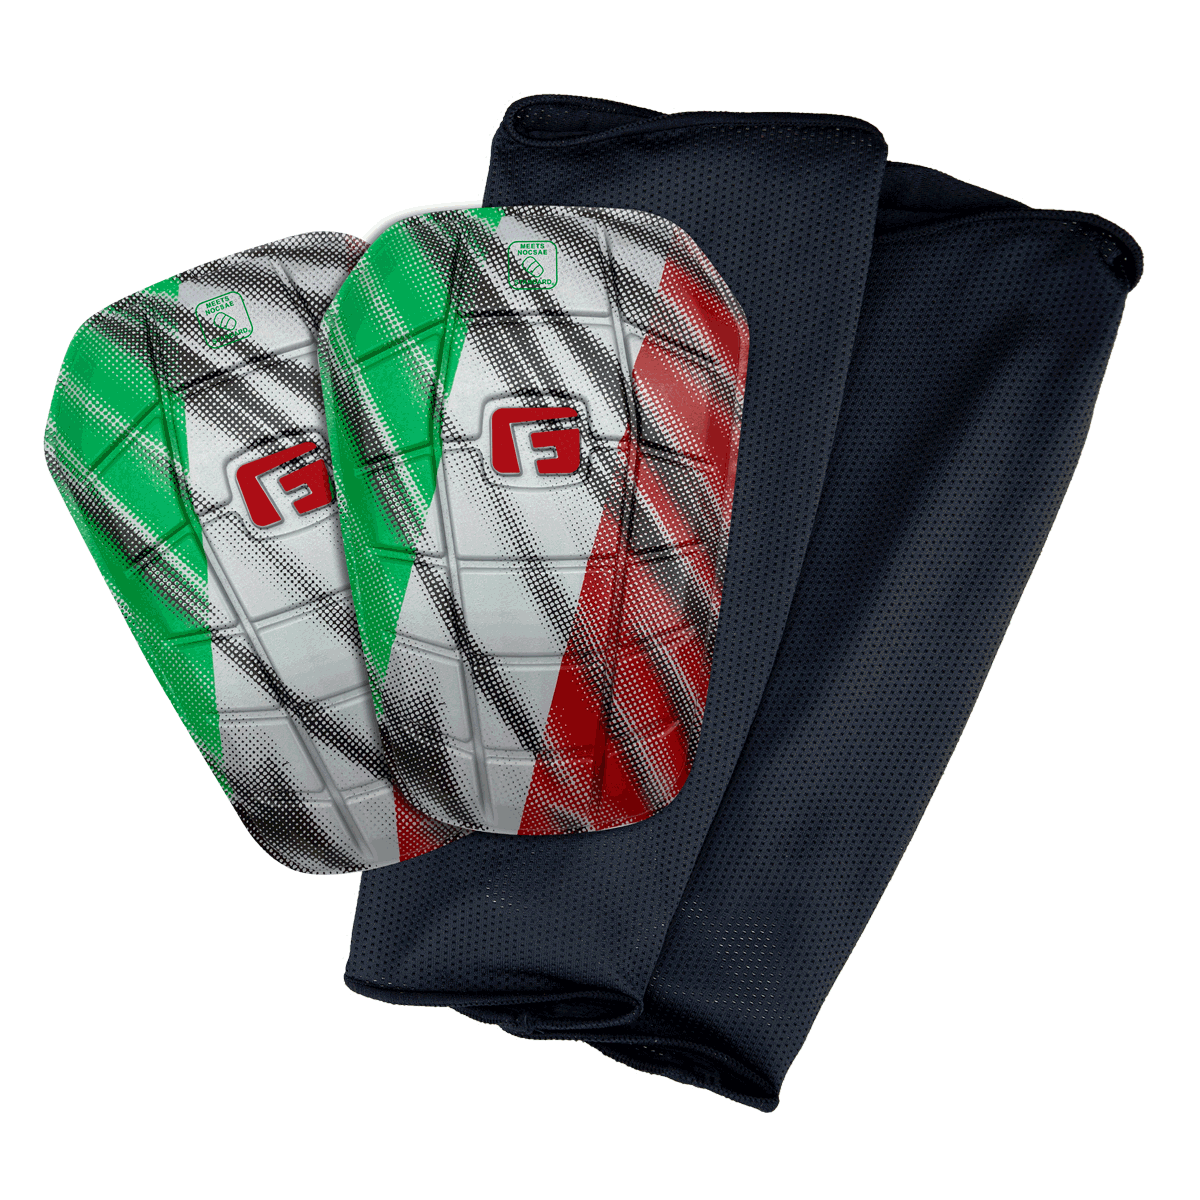 Soccer Blade NOCSAE Shin Guards Slip in light weight flexible stay in place no sleeve soccer